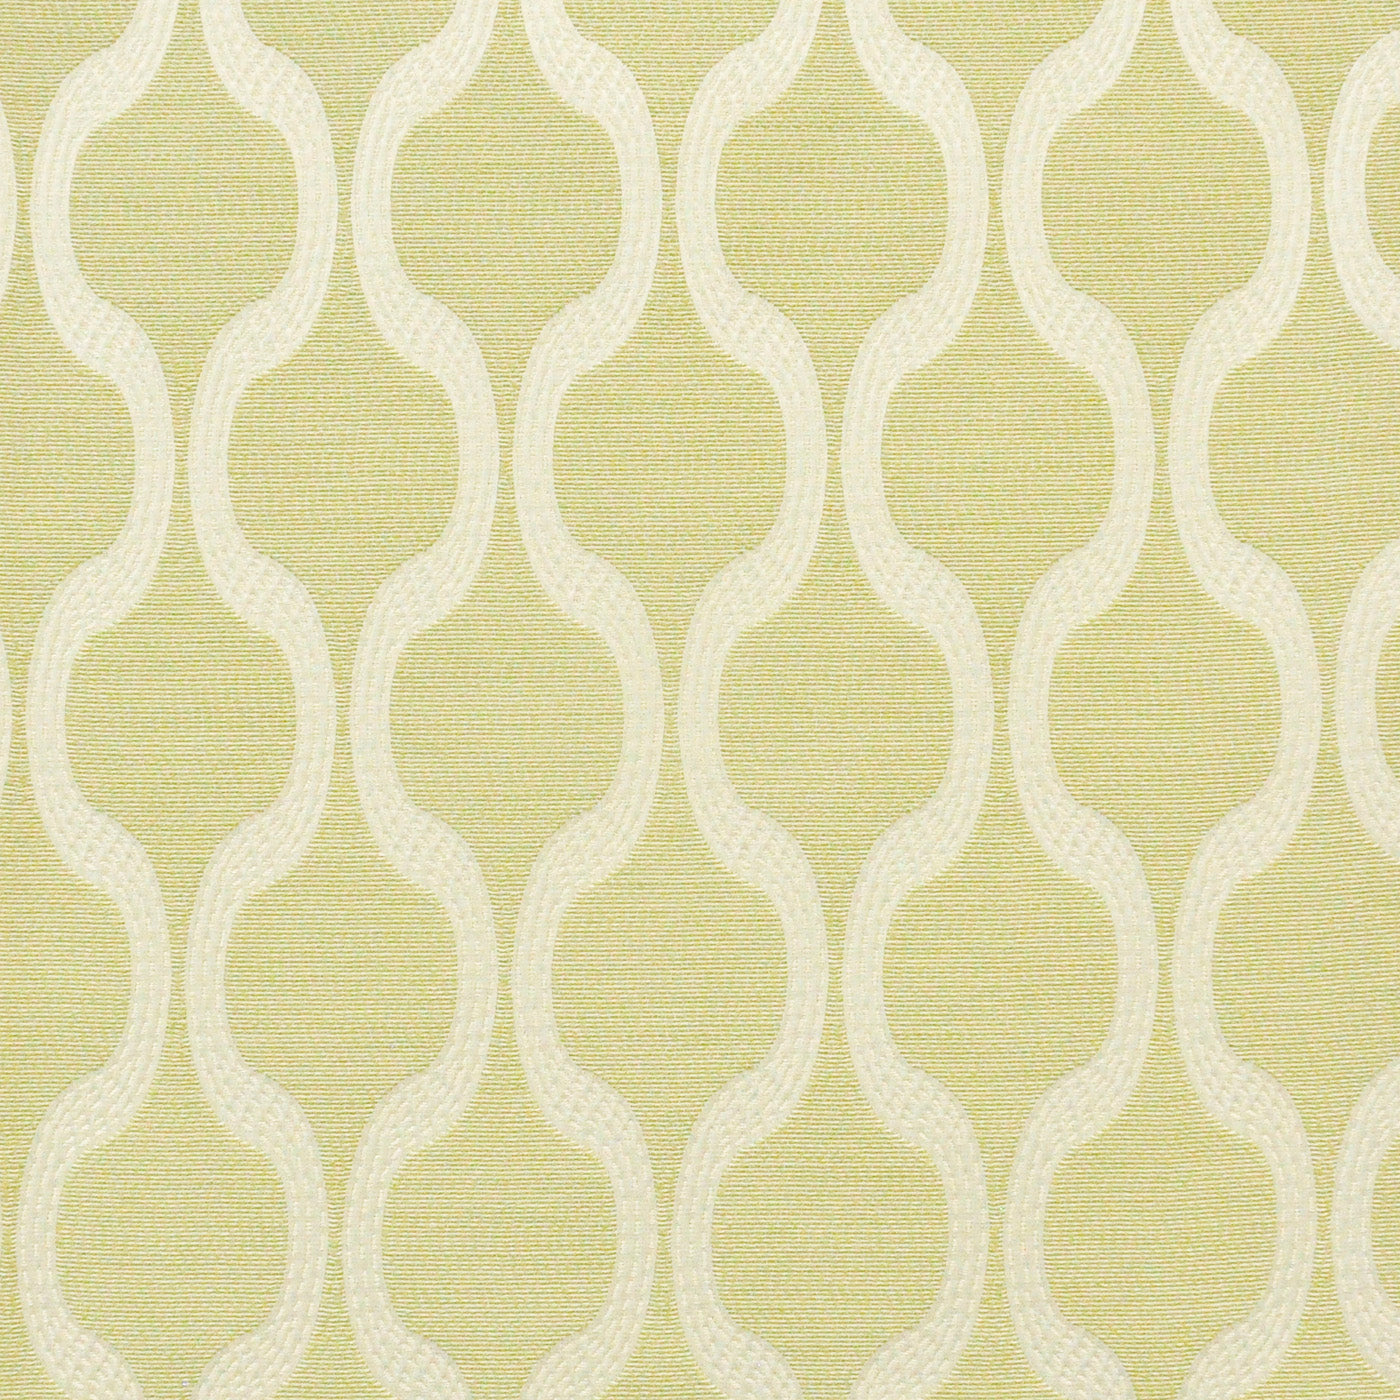 Purchase Maxwell Fabric - Cyrus, # 624 Grass